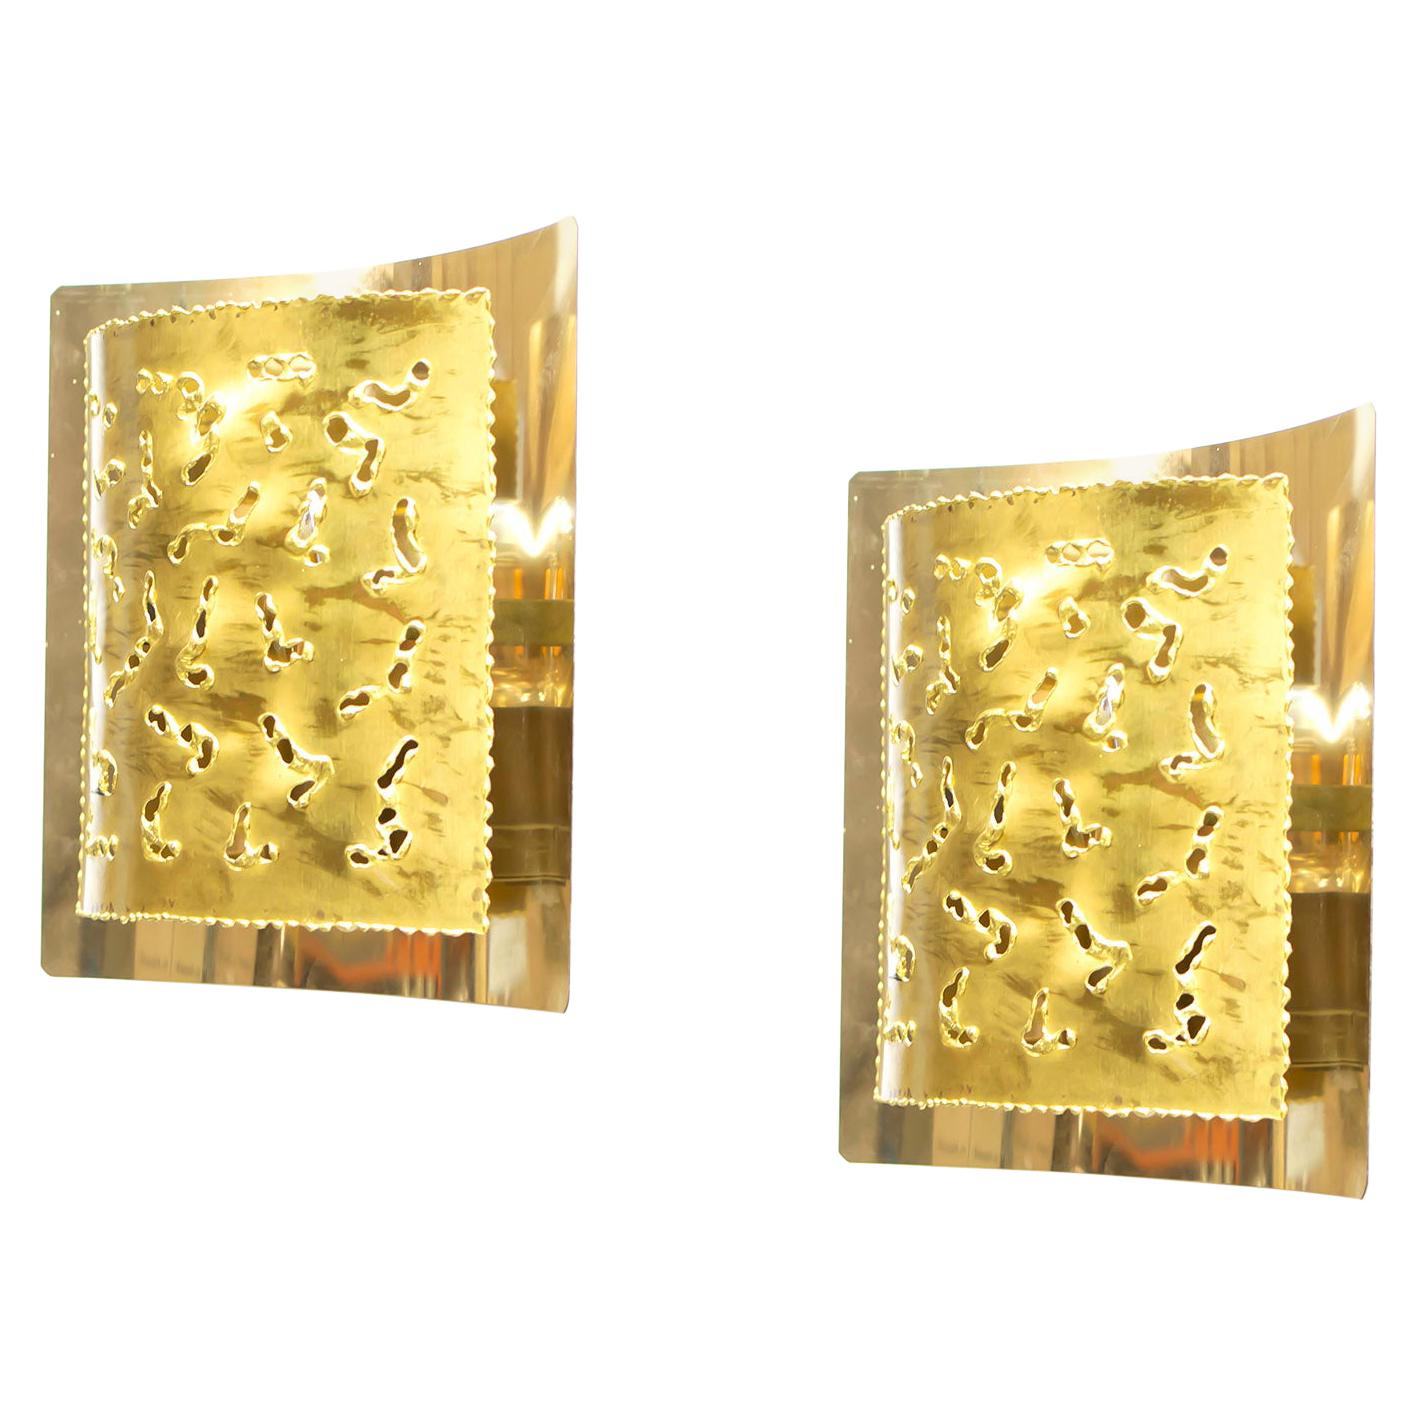 Pair of Scandinavian Wall Lights by Svend Aage Holm Sorensen, Denmark, 1970s For Sale